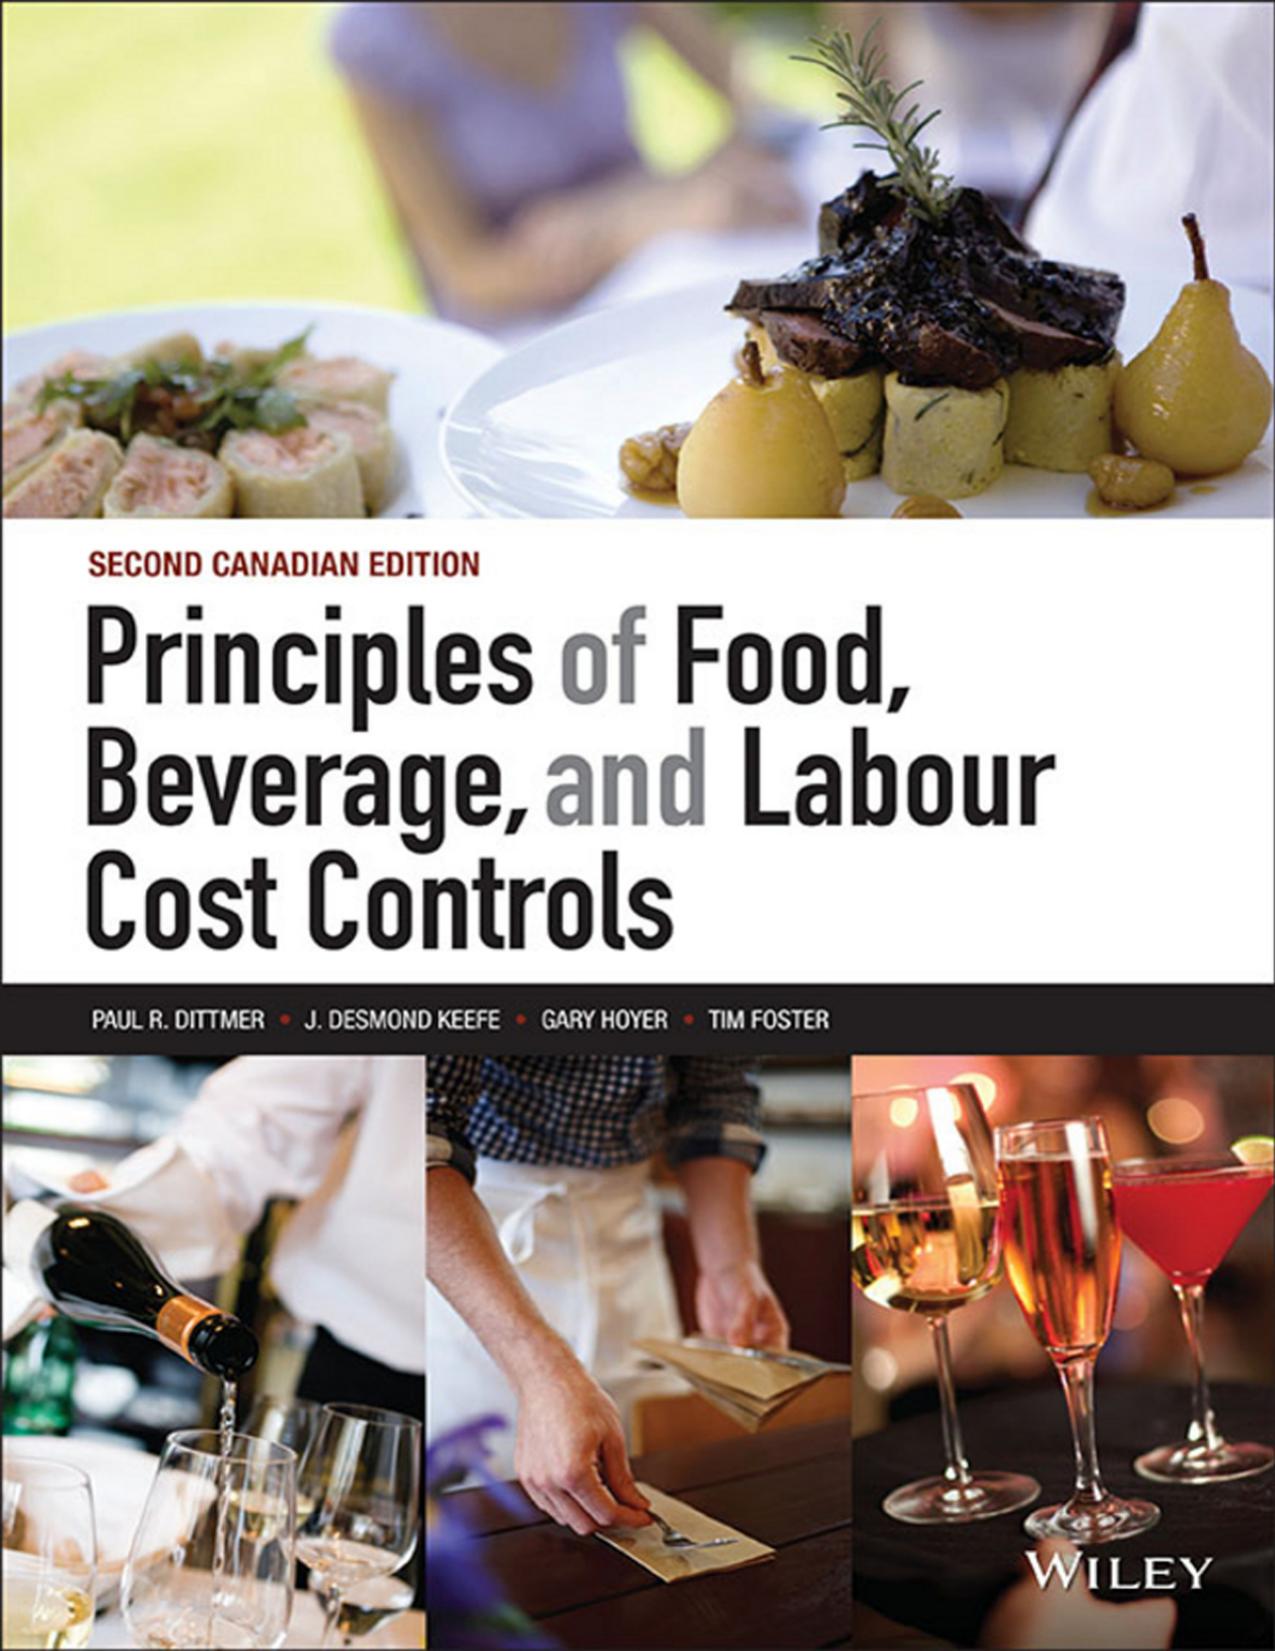 (eBook PDF)Principles of Food, Beverage, and Labour Cost Controls, 2nd Canadian Edition by Paul R. Dittmer,J. Desmond Keefe